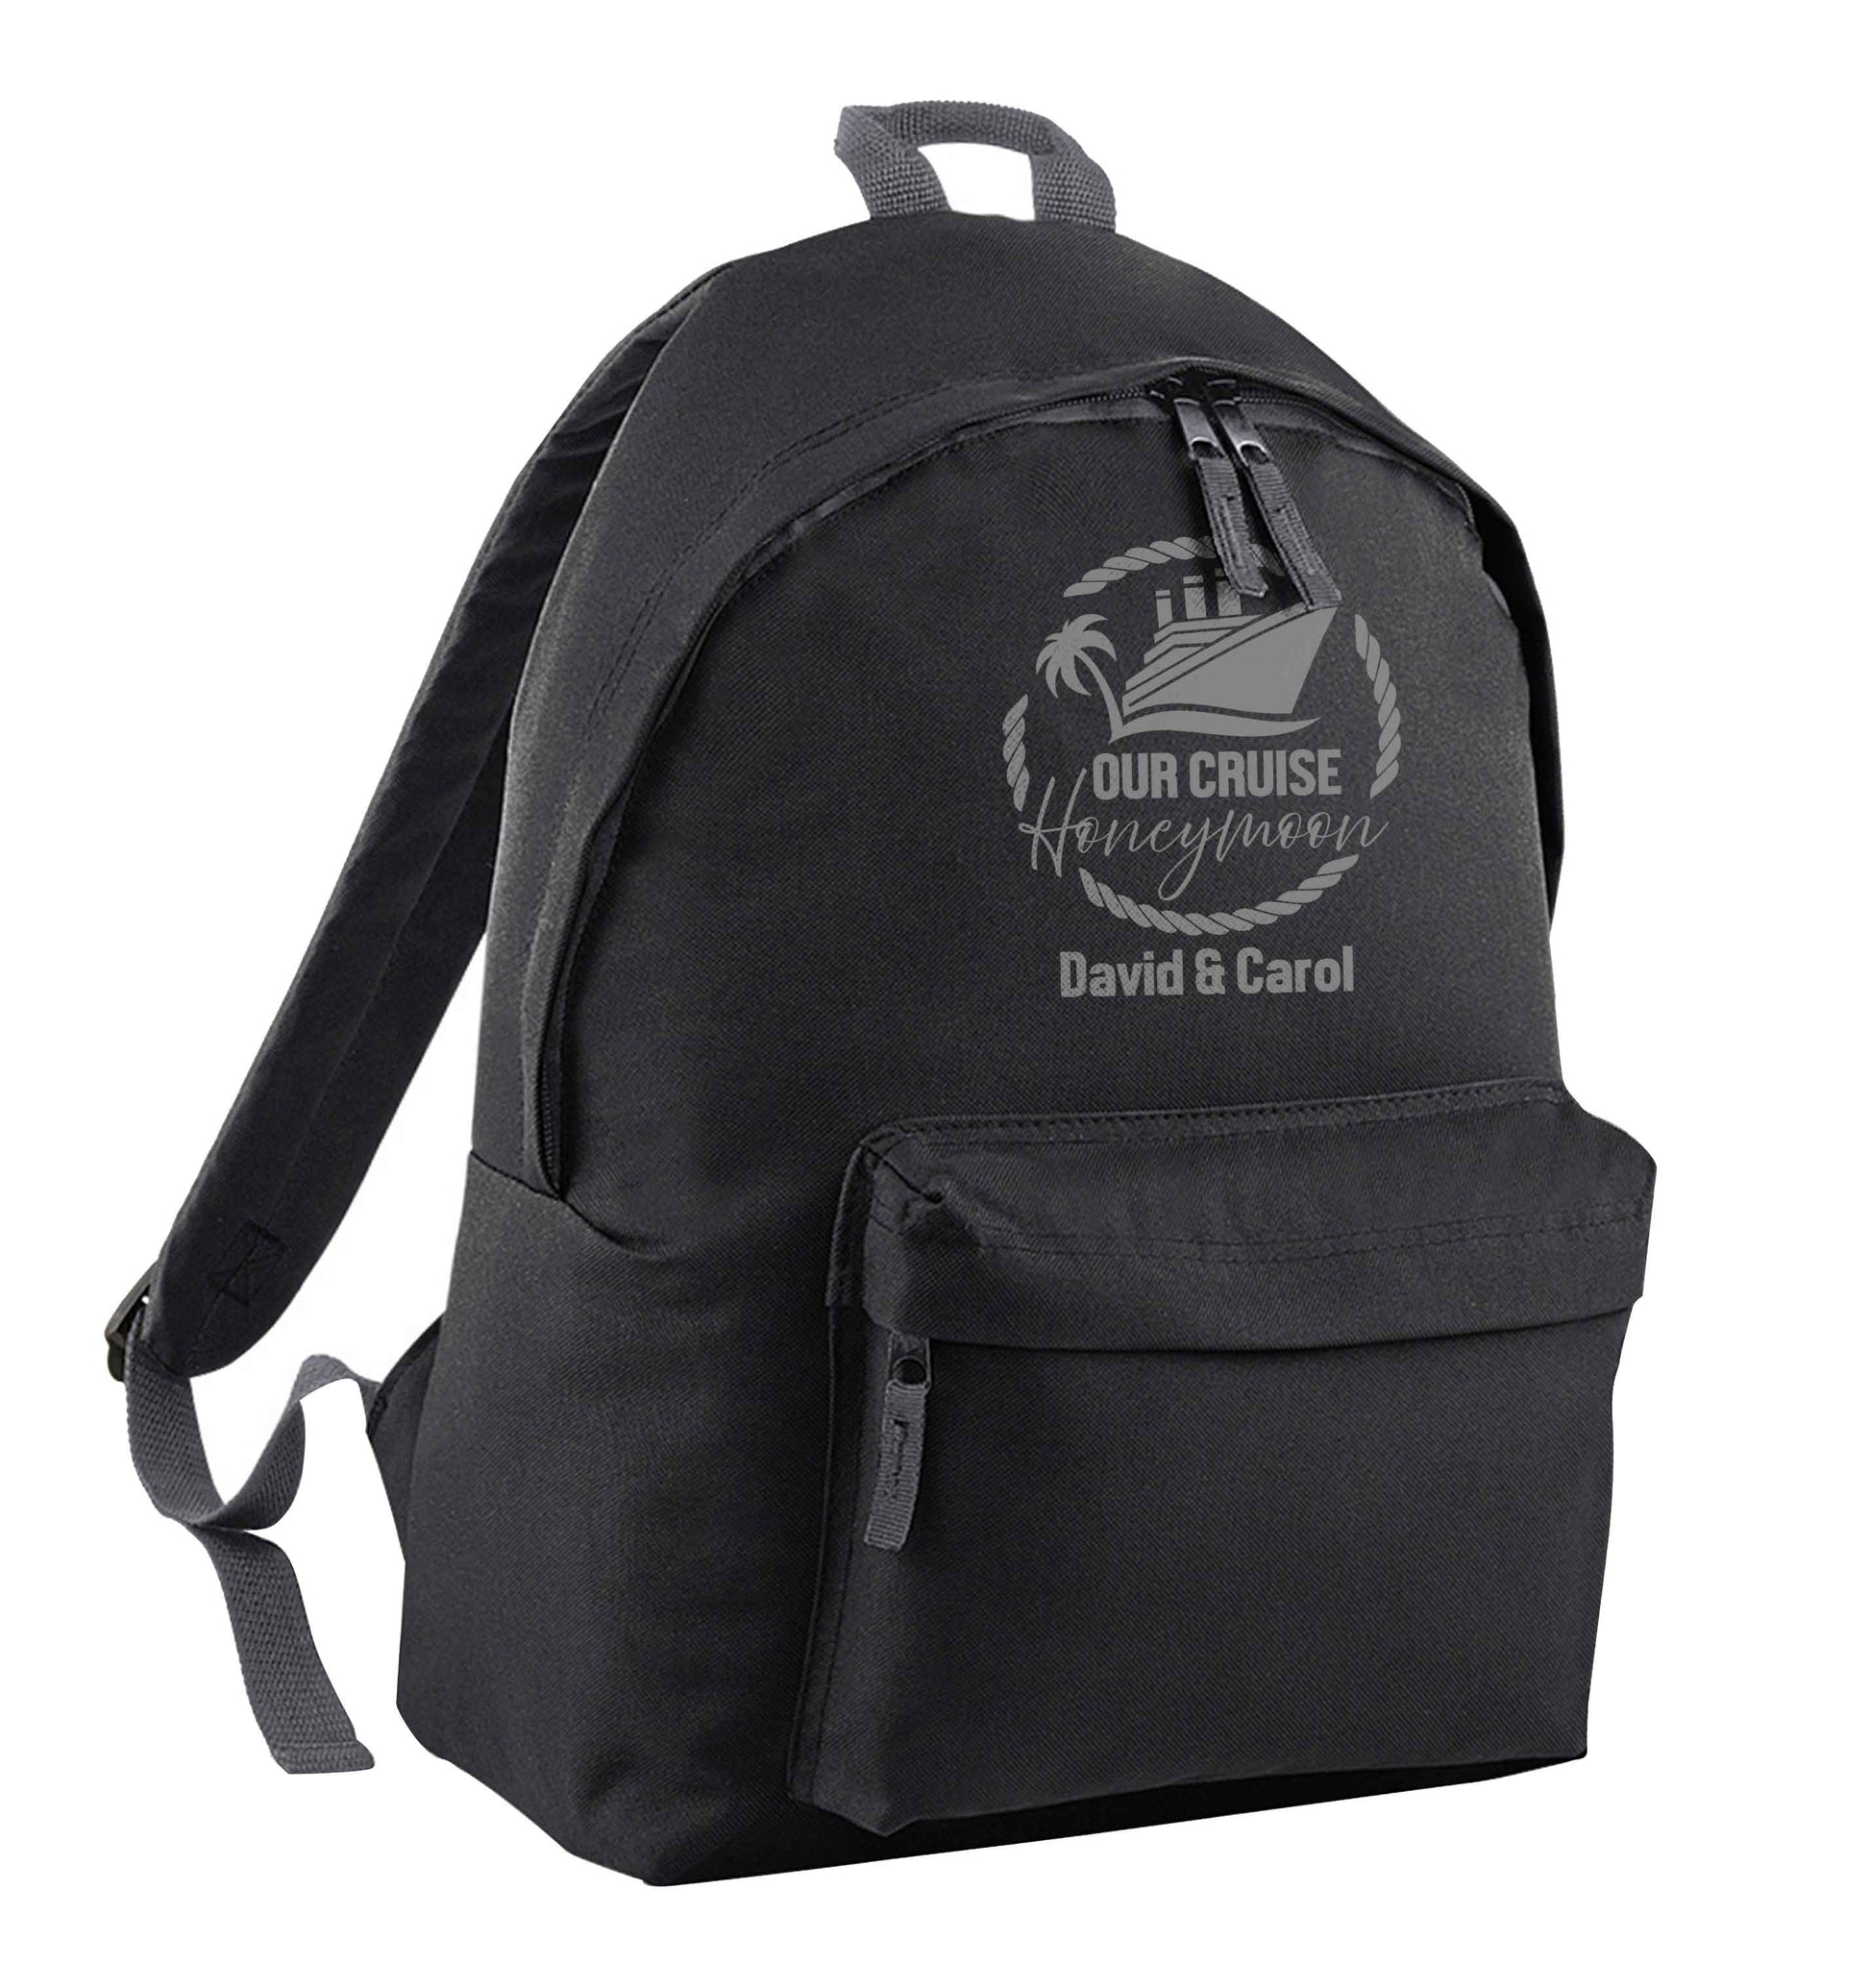 Our cruise honeymoon personalised black adults backpack